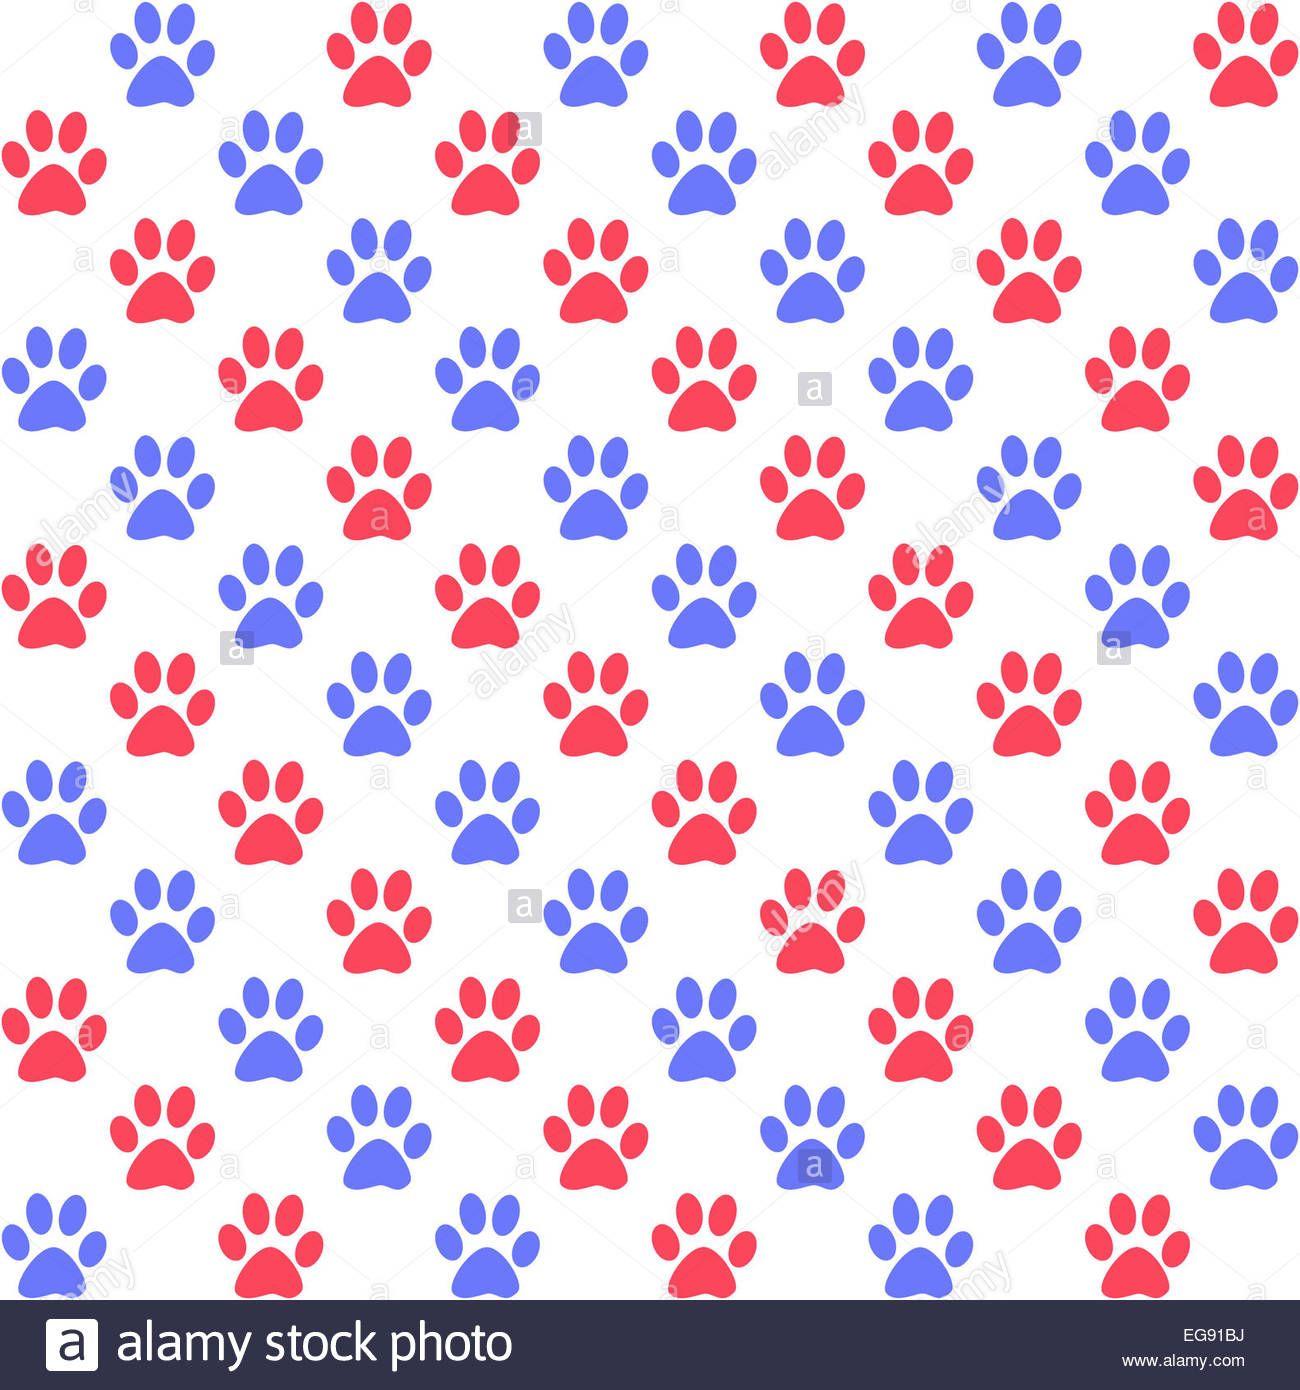 Blue Red Paw Logo - paw-prints-in-red-and-blue-on-white-a-seamless-background-pattern ...